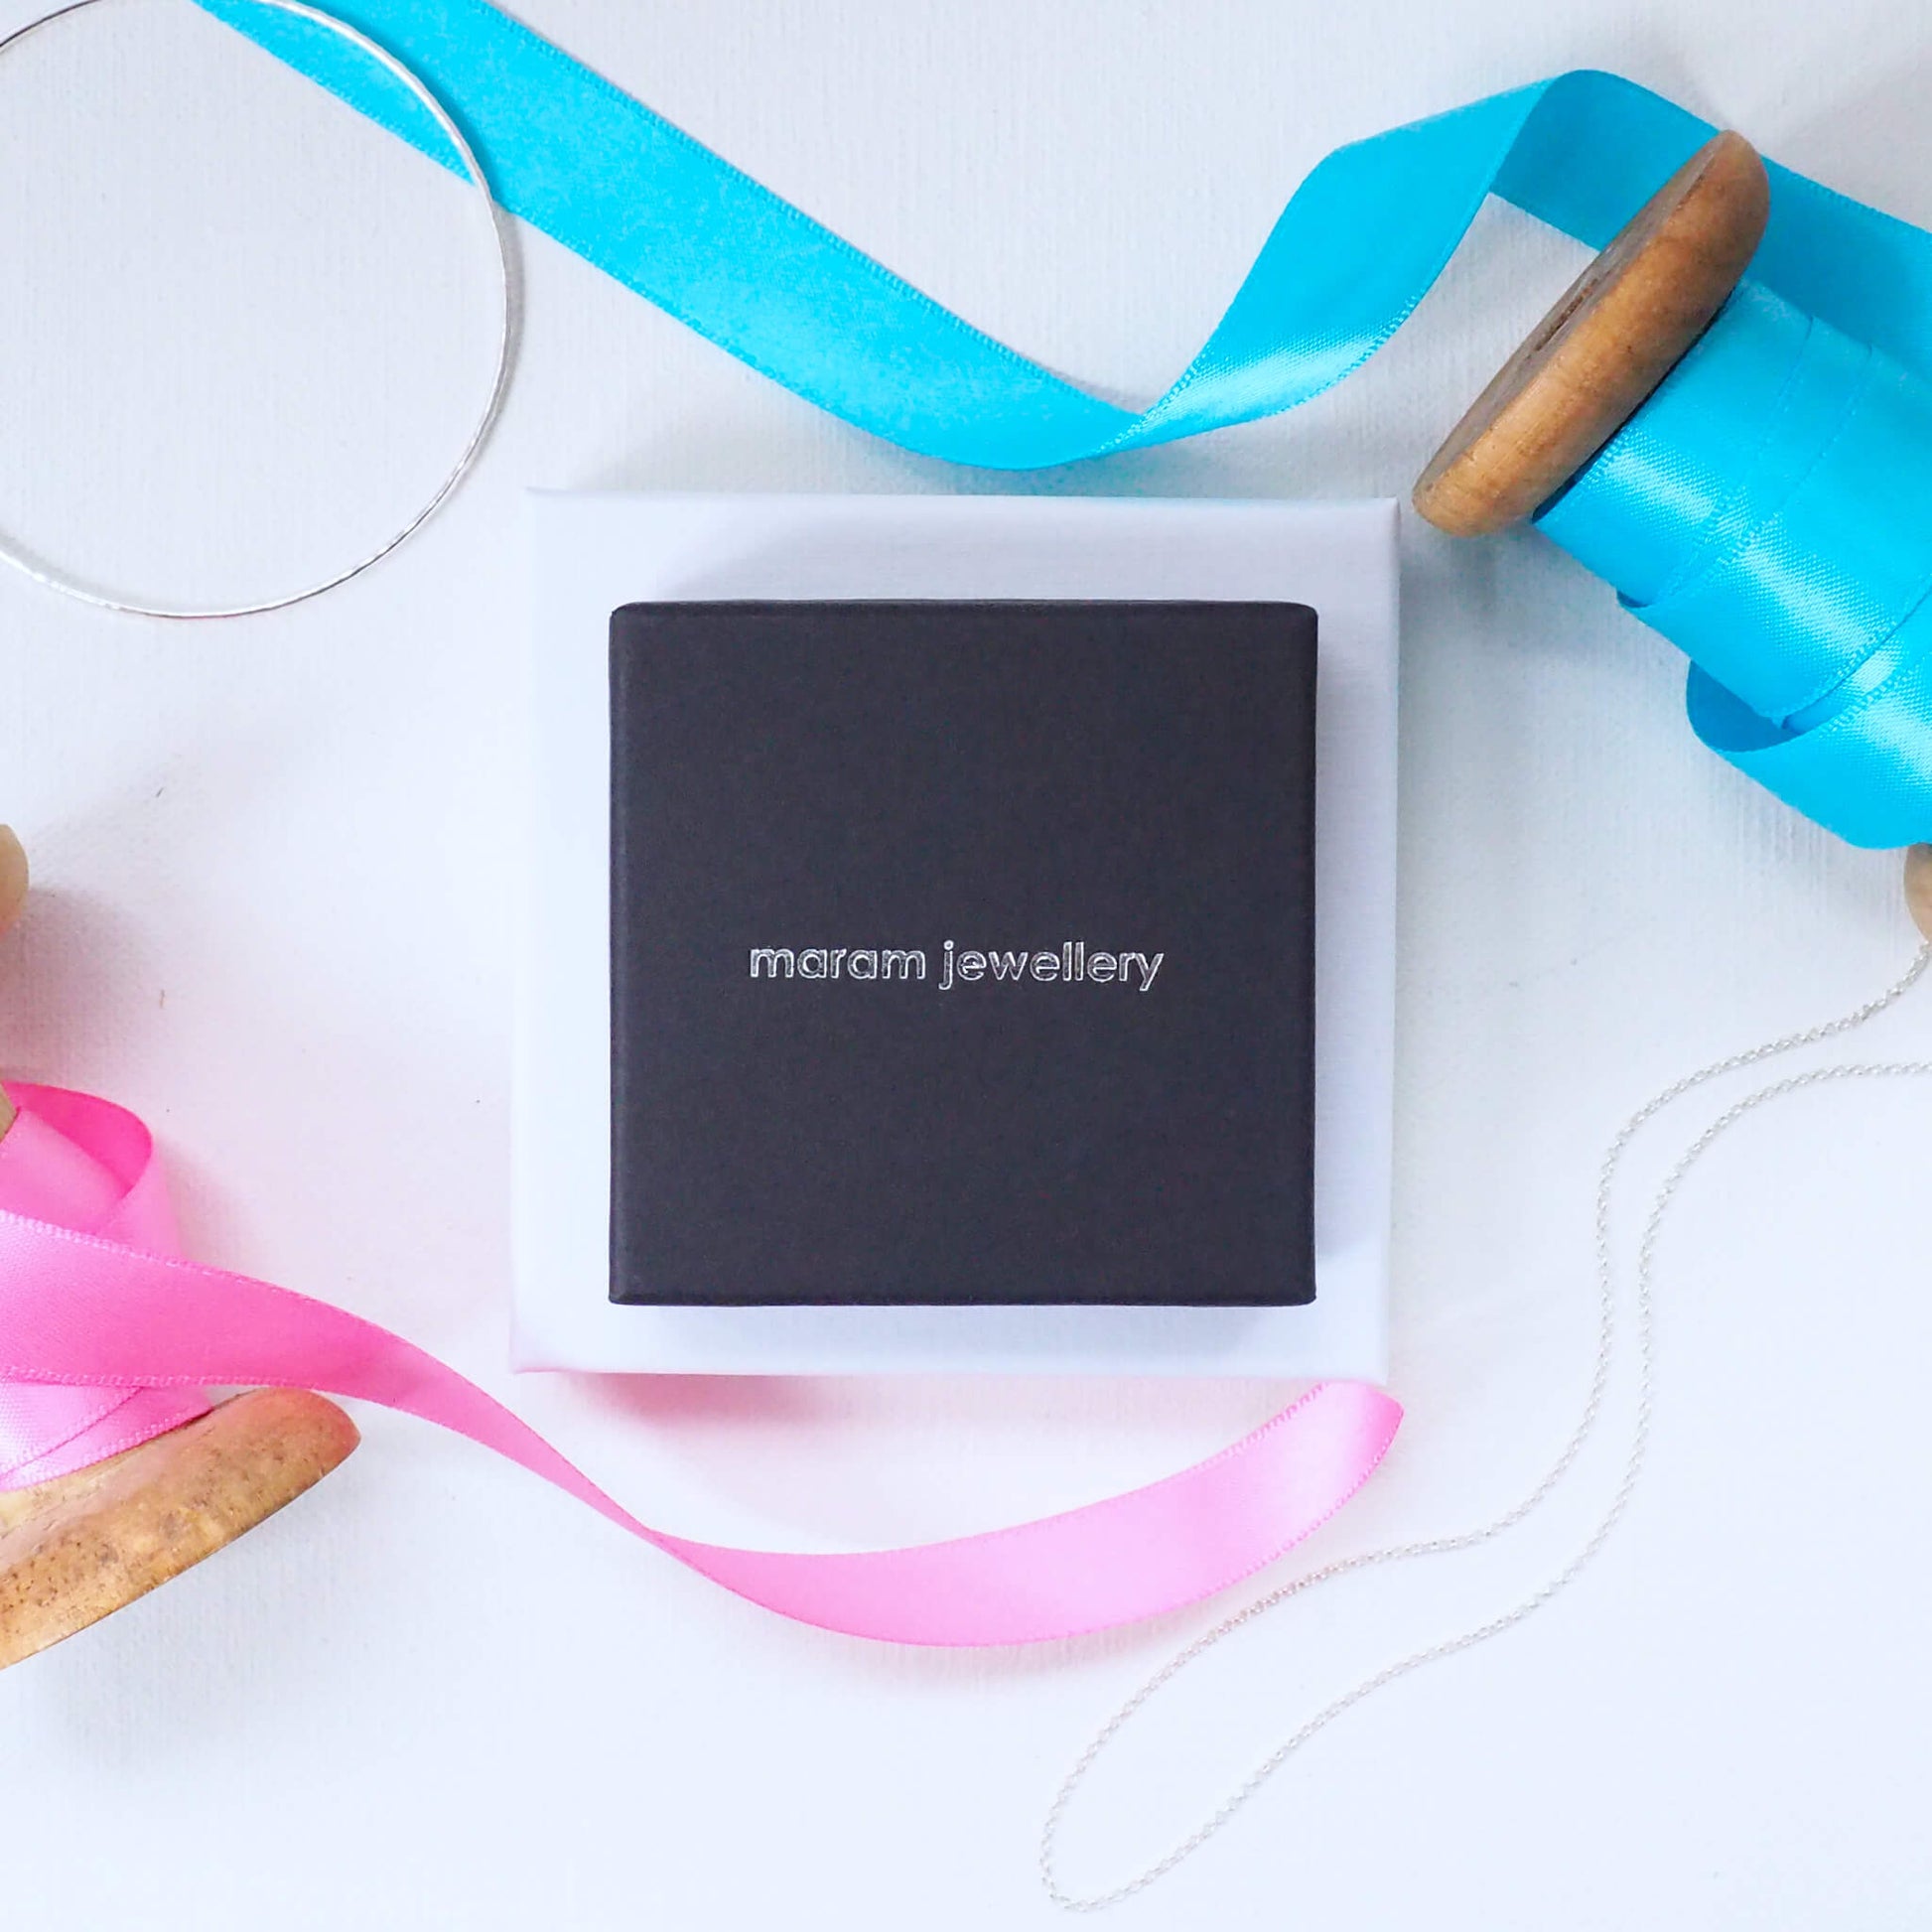 maram jewellery pendant or bangle box in black with 'maram jewellery' text in silver in the middle. shown surrounded by ribbon bangle and chain. maram jewellery is based in Scotland UK